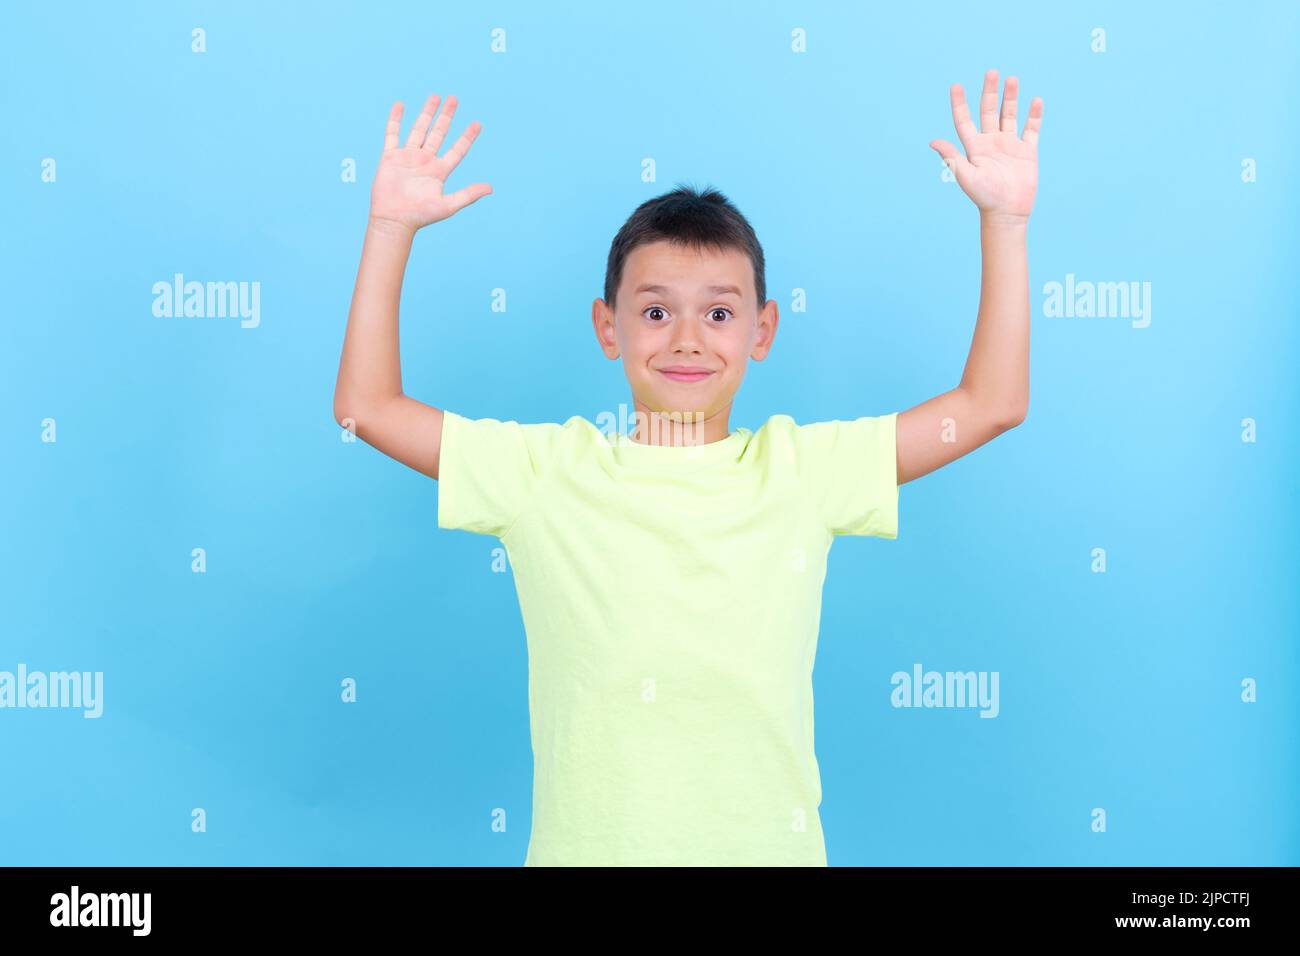 8-year-old boy raises his hands in a surprised gesture Stock Photo